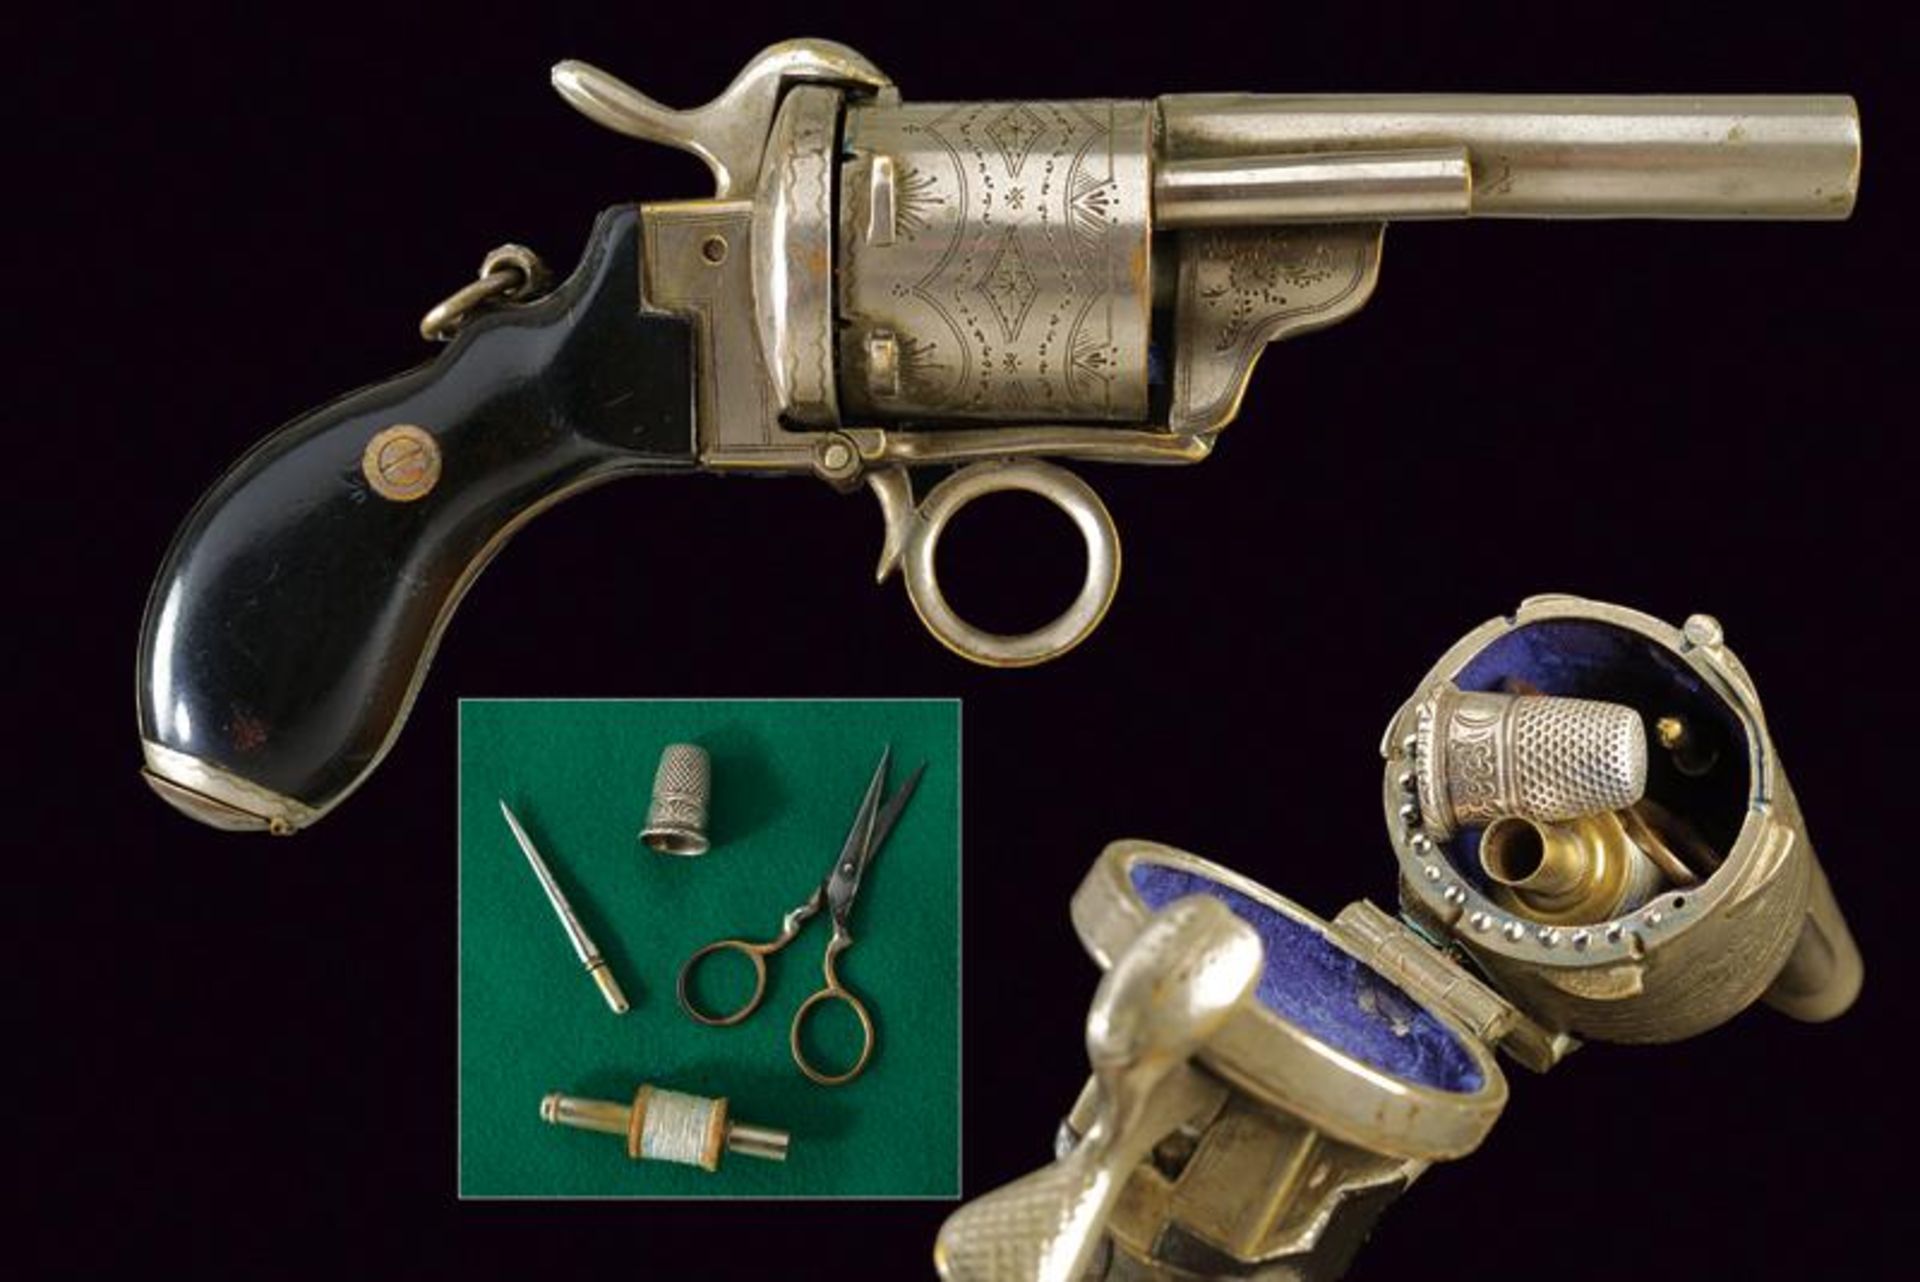 A rare sewing kit with revolver-like case